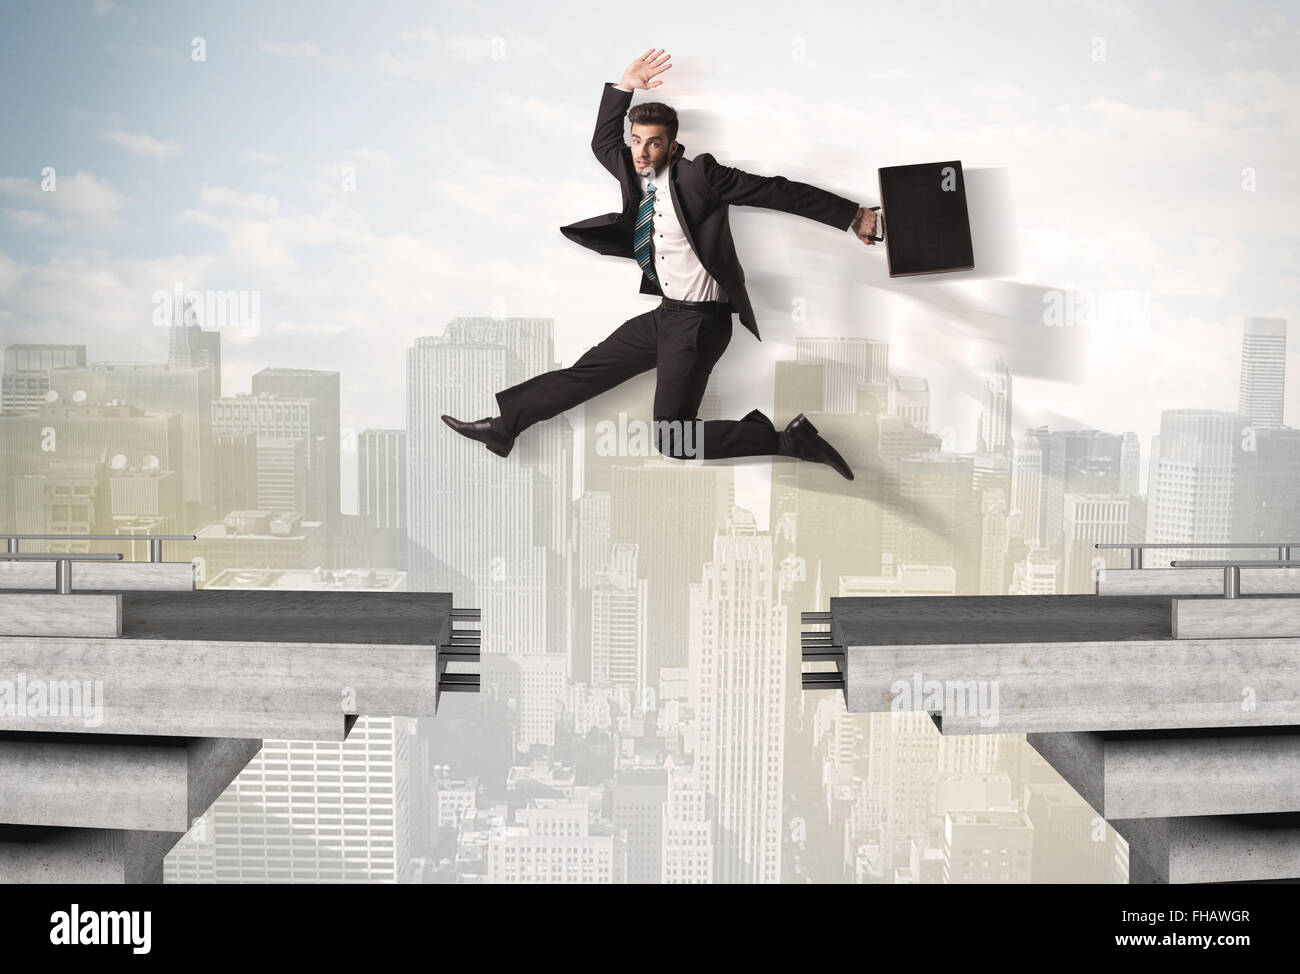 Energetic business man jumping over a bridge with gap Stock Photo